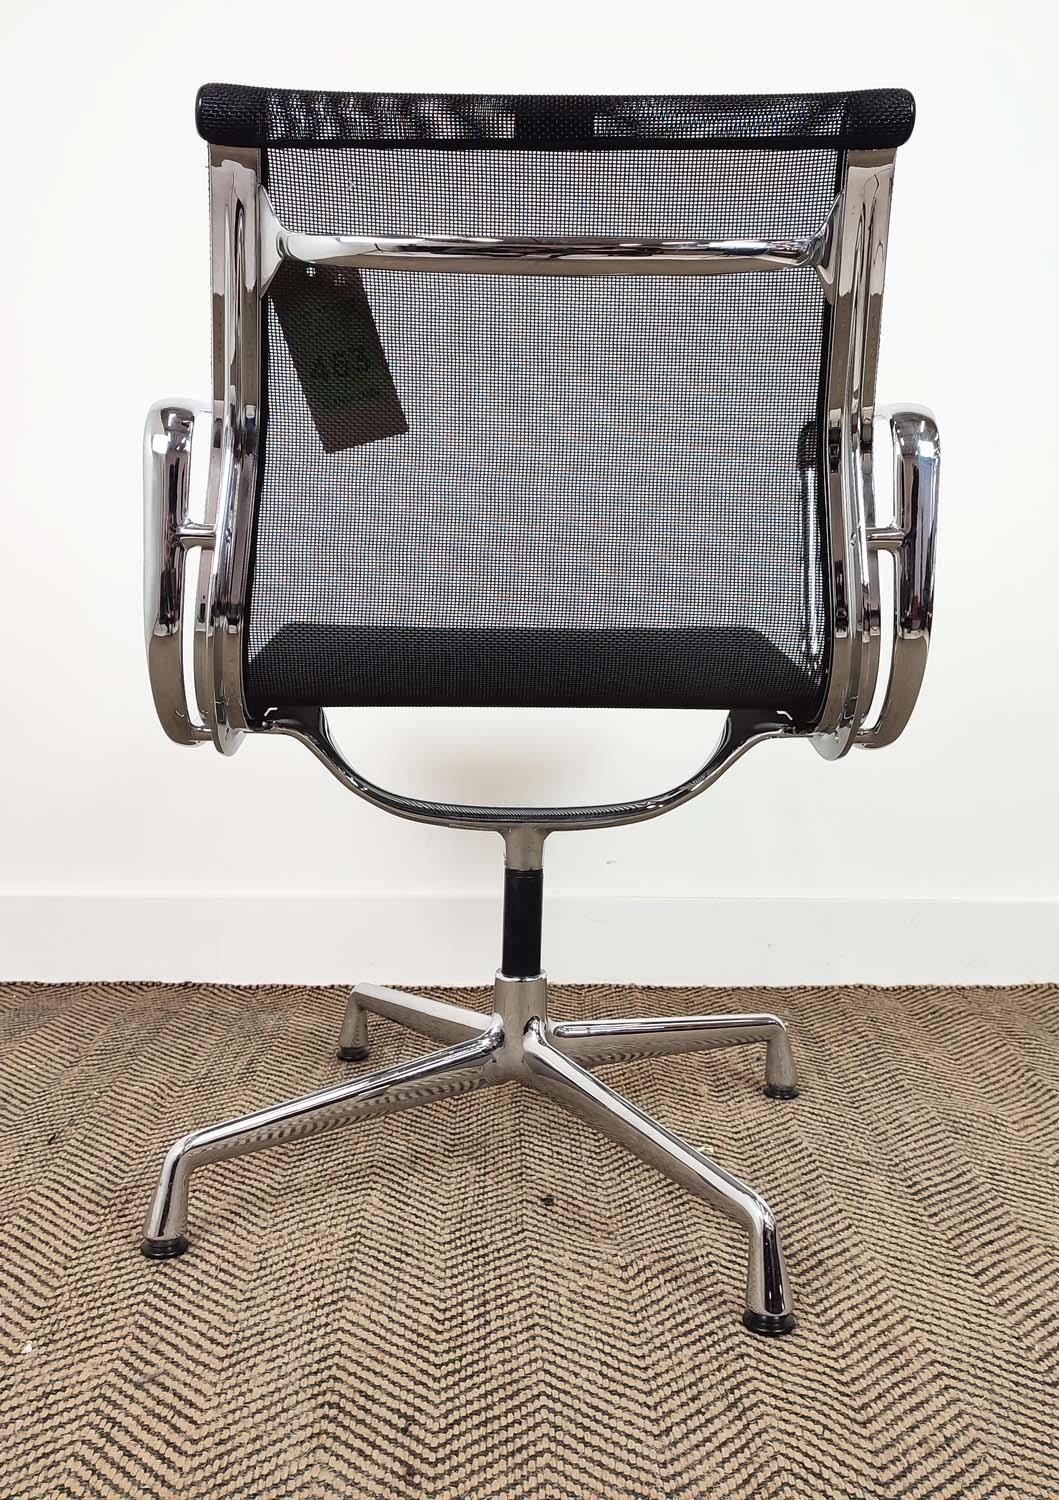 VITRA ALUMINIUM GROUP CHAIR, designed by Charles and Ray Eames, 57cm W x 85cm H, bears label. - Bild 4 aus 6